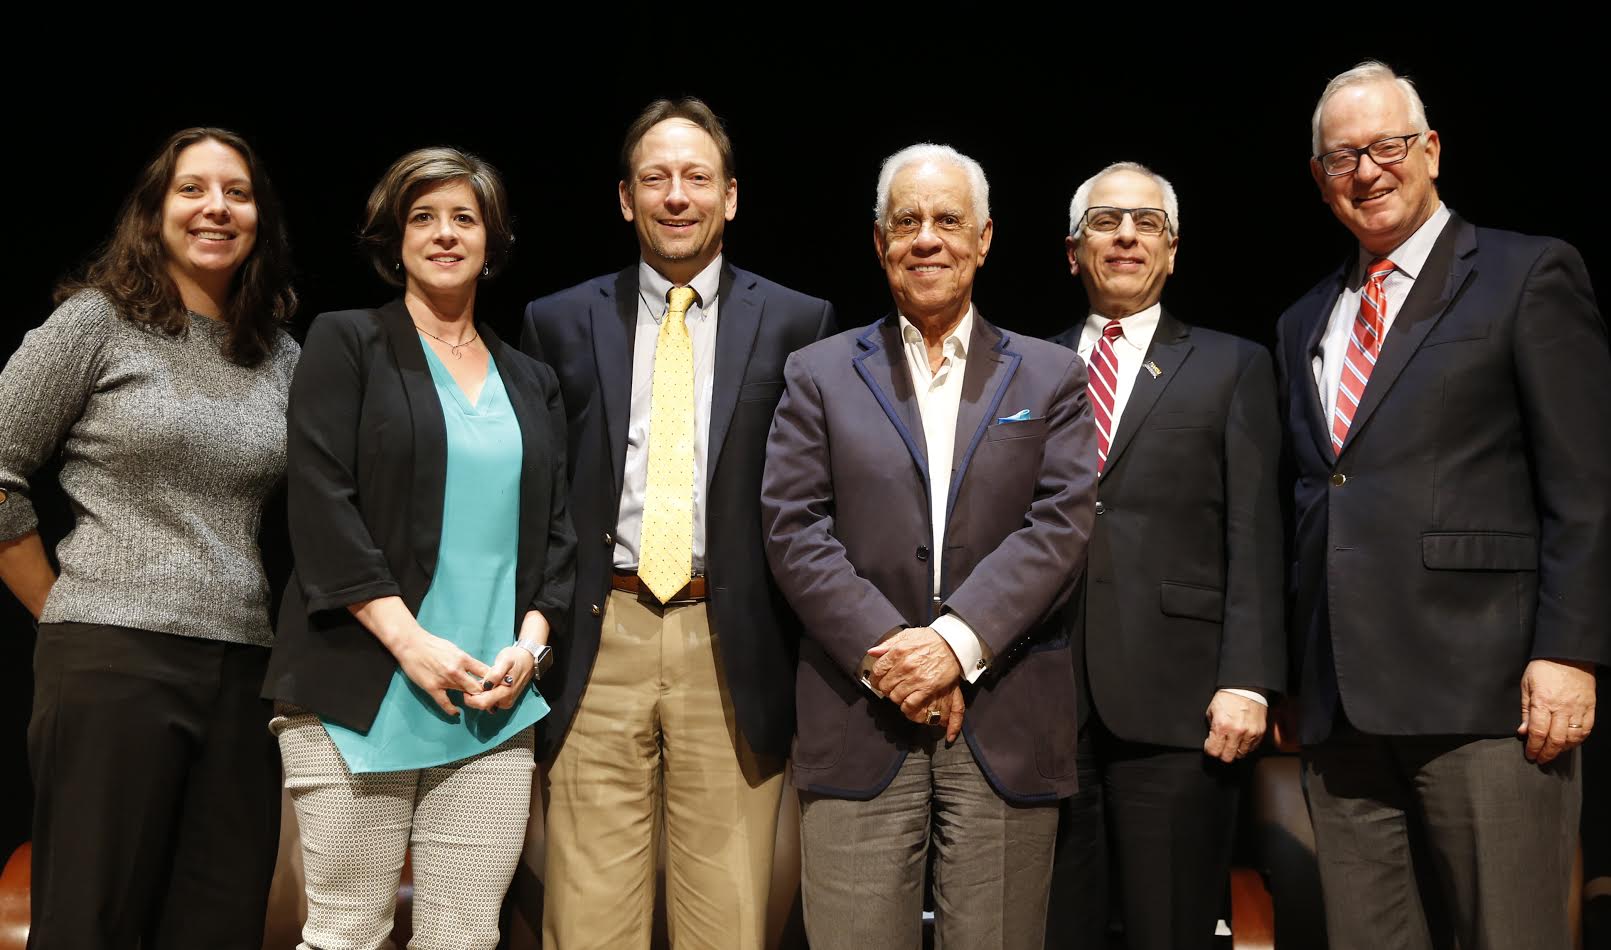 The panel consisted of, from left, Alexandra Reckendorf; Meghan Gough; Jack Trammell; Governor L. Douglas Wilder; Dean John Accordino; and Robert Holsworth.